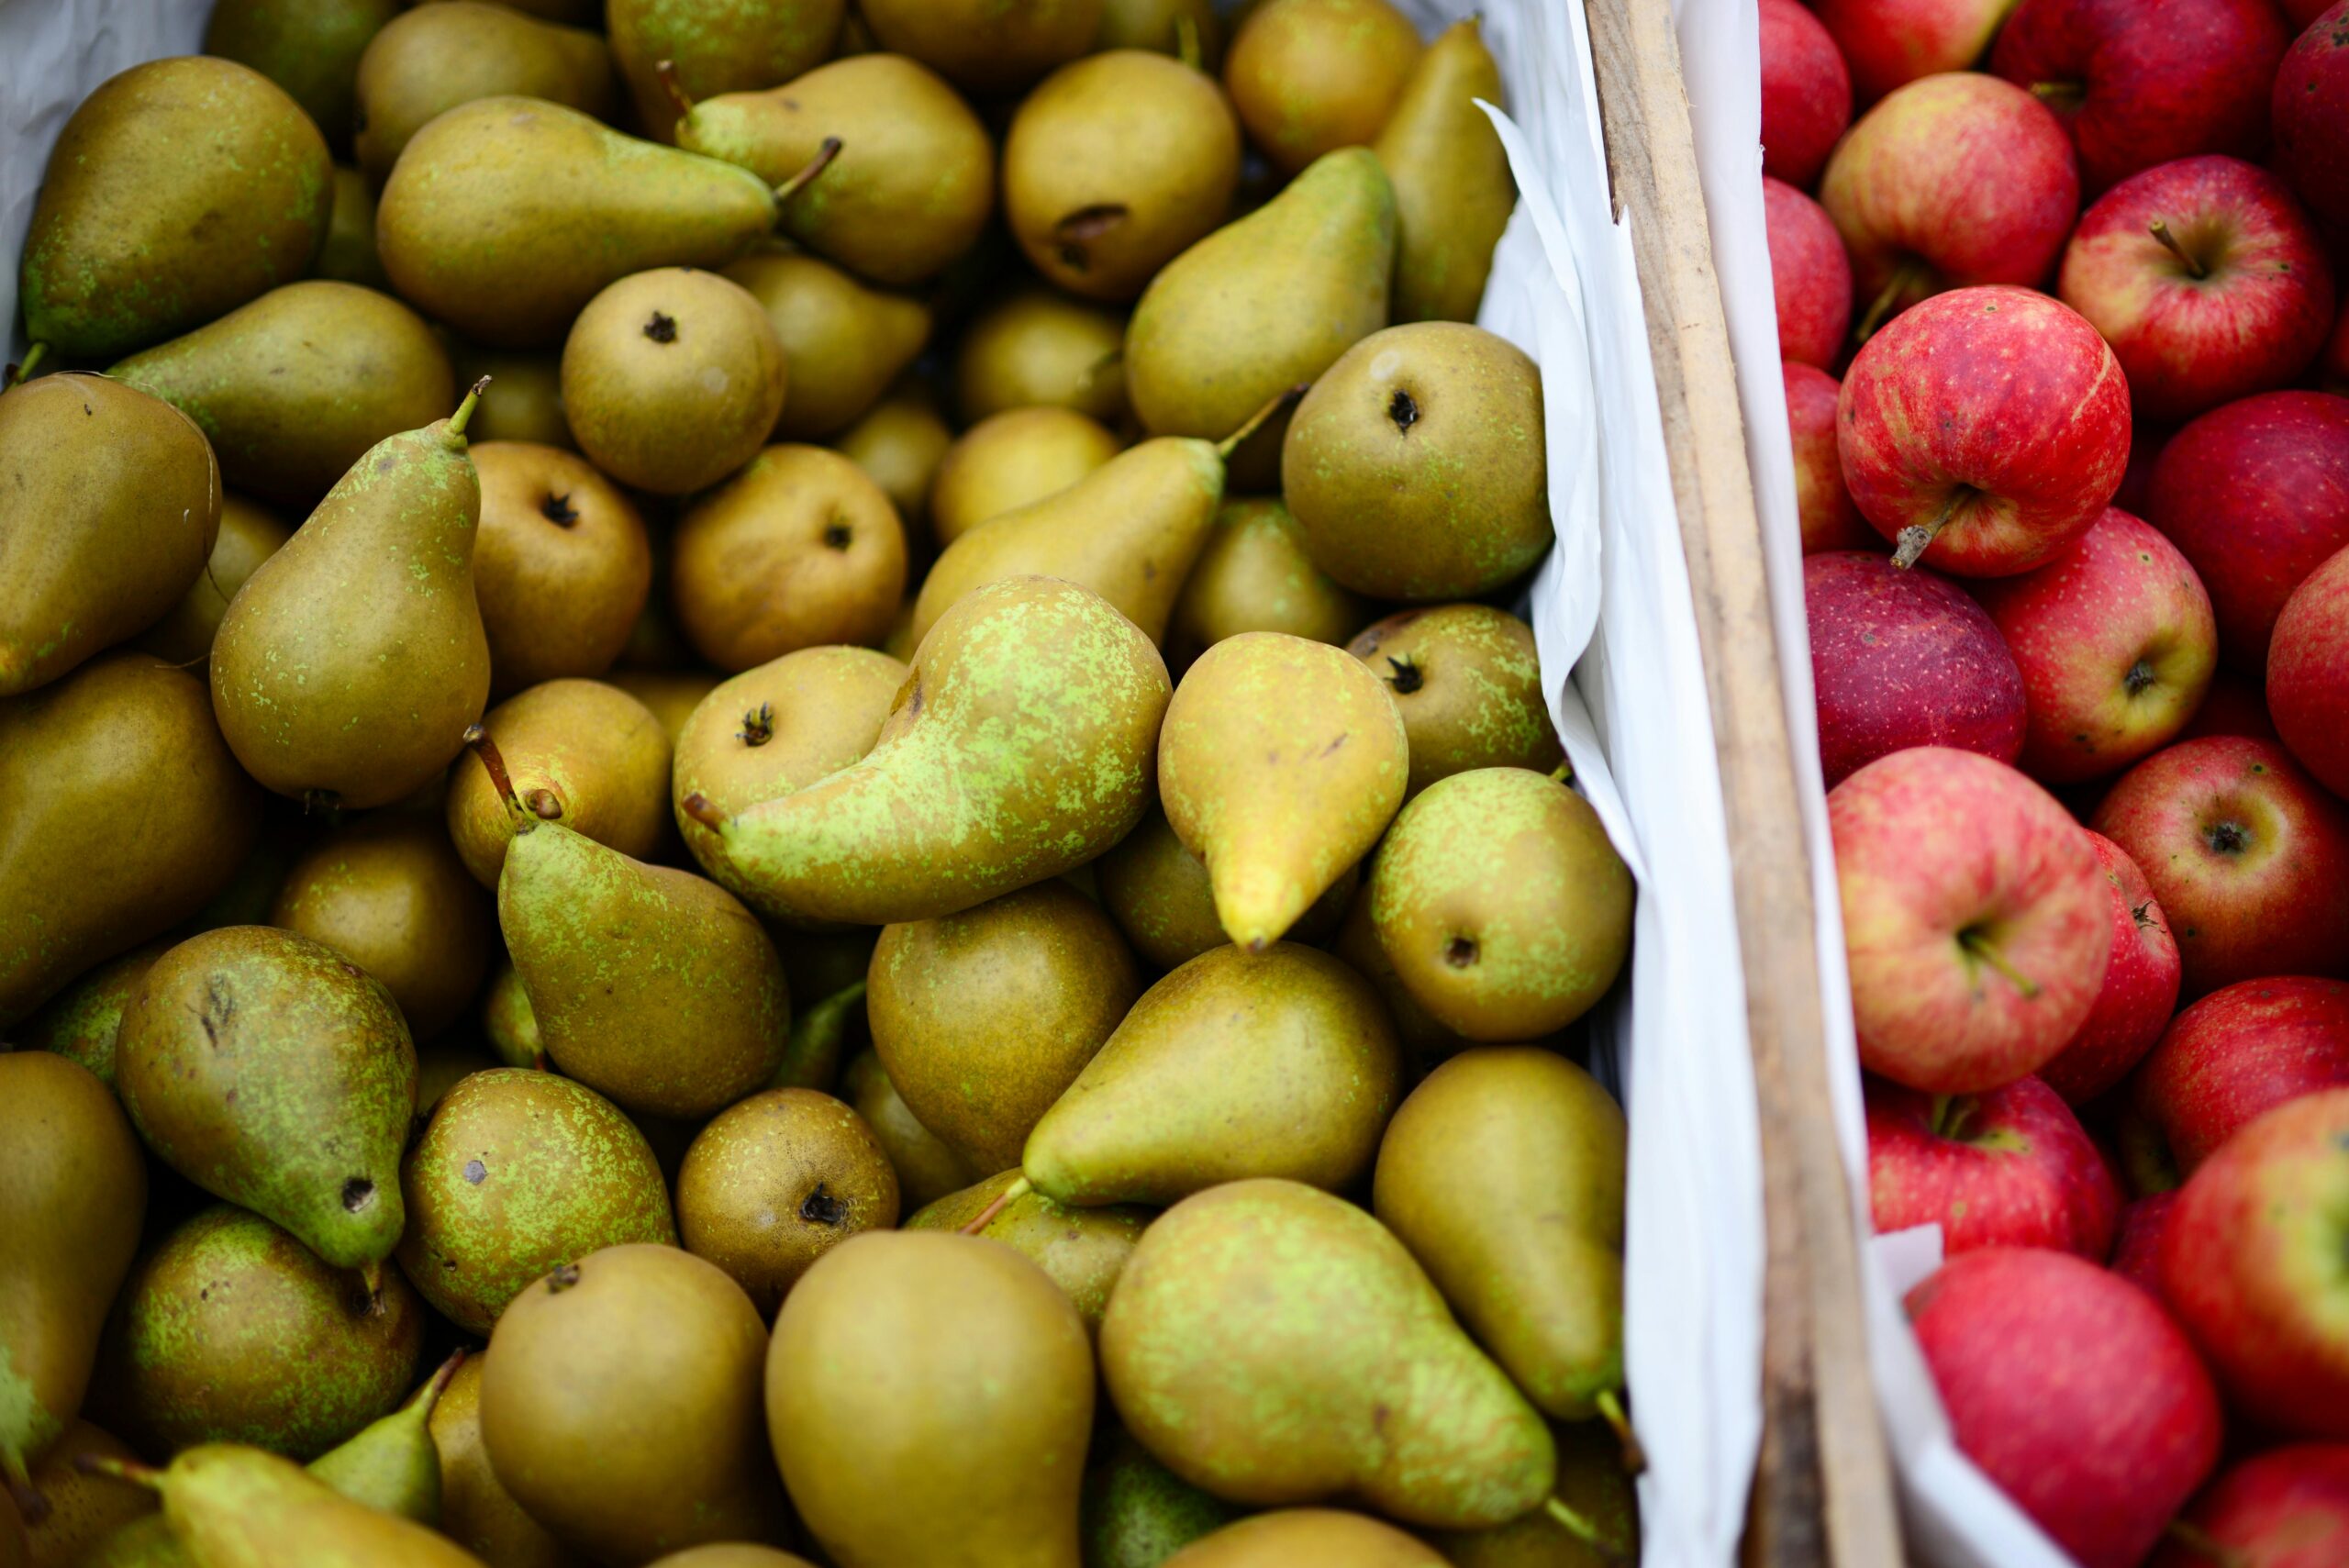 a crate that holds bright green pears. next to a crate that is holding apples